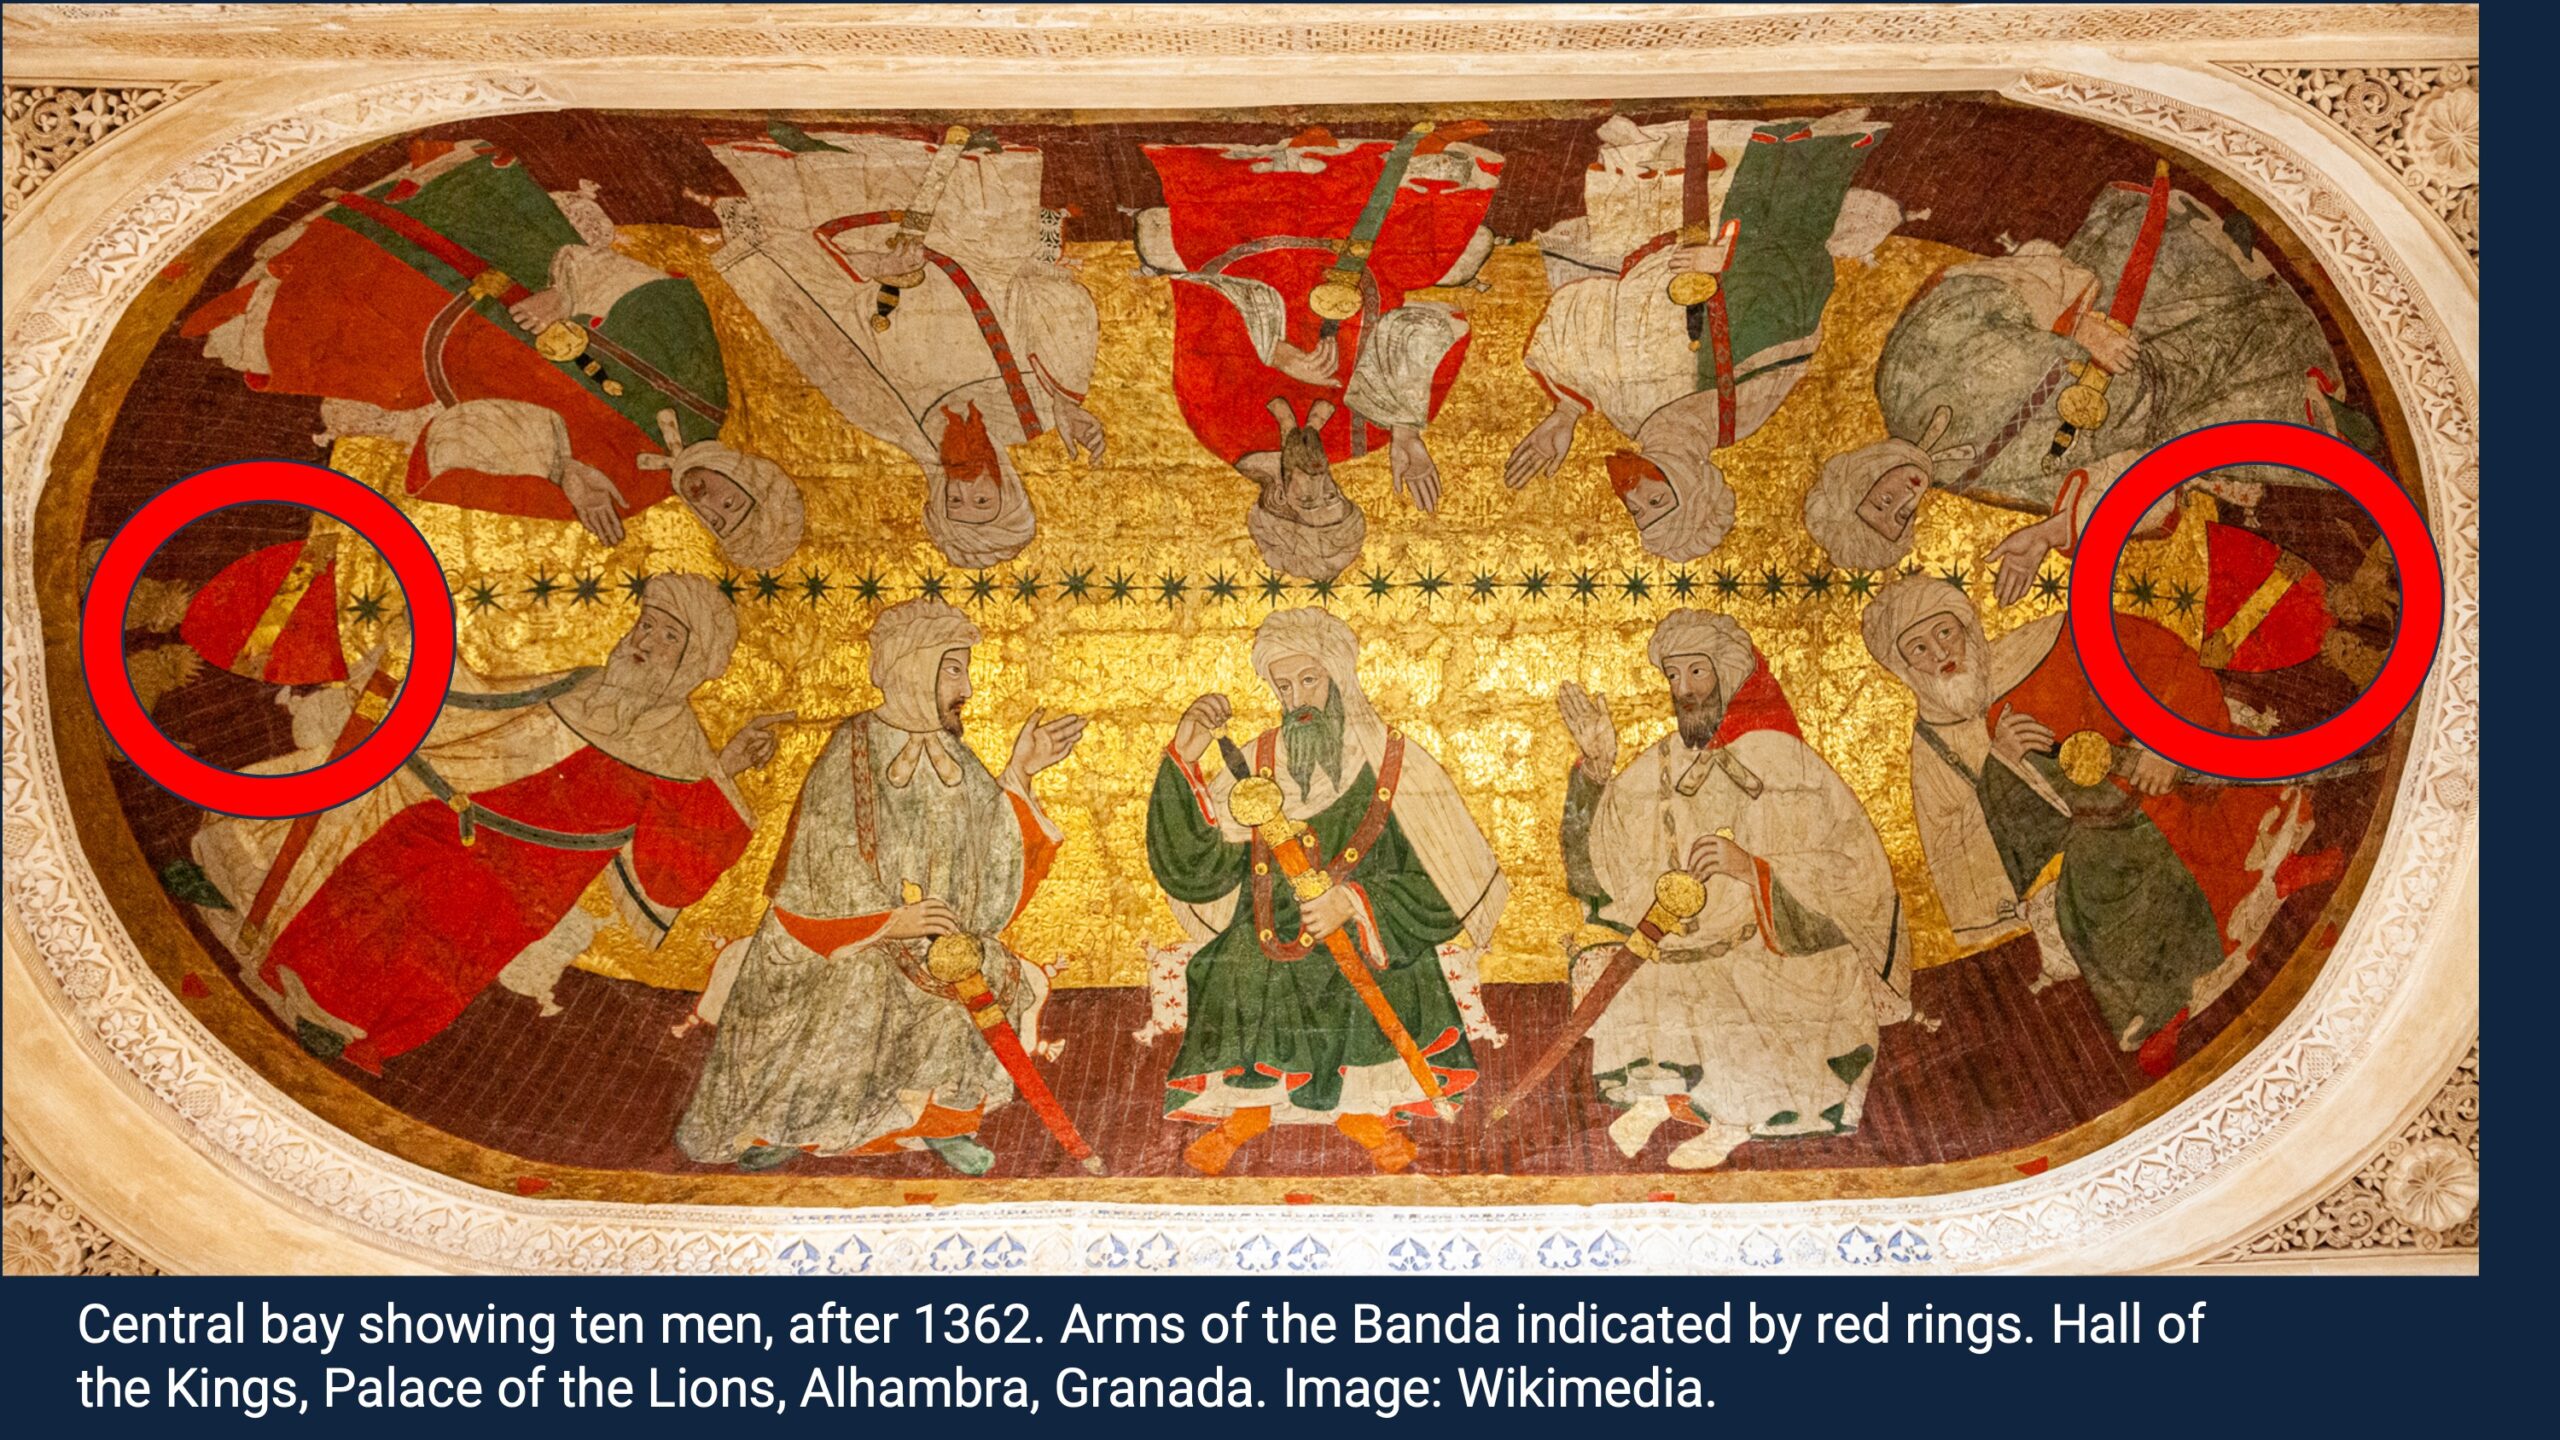 4. Central bay showing ten men, after 1362. Arms of the Banda indicated by red rings. Hall of the Kings, Palace of the Lions, Alhambra, Granada. Image: Wikimedia.